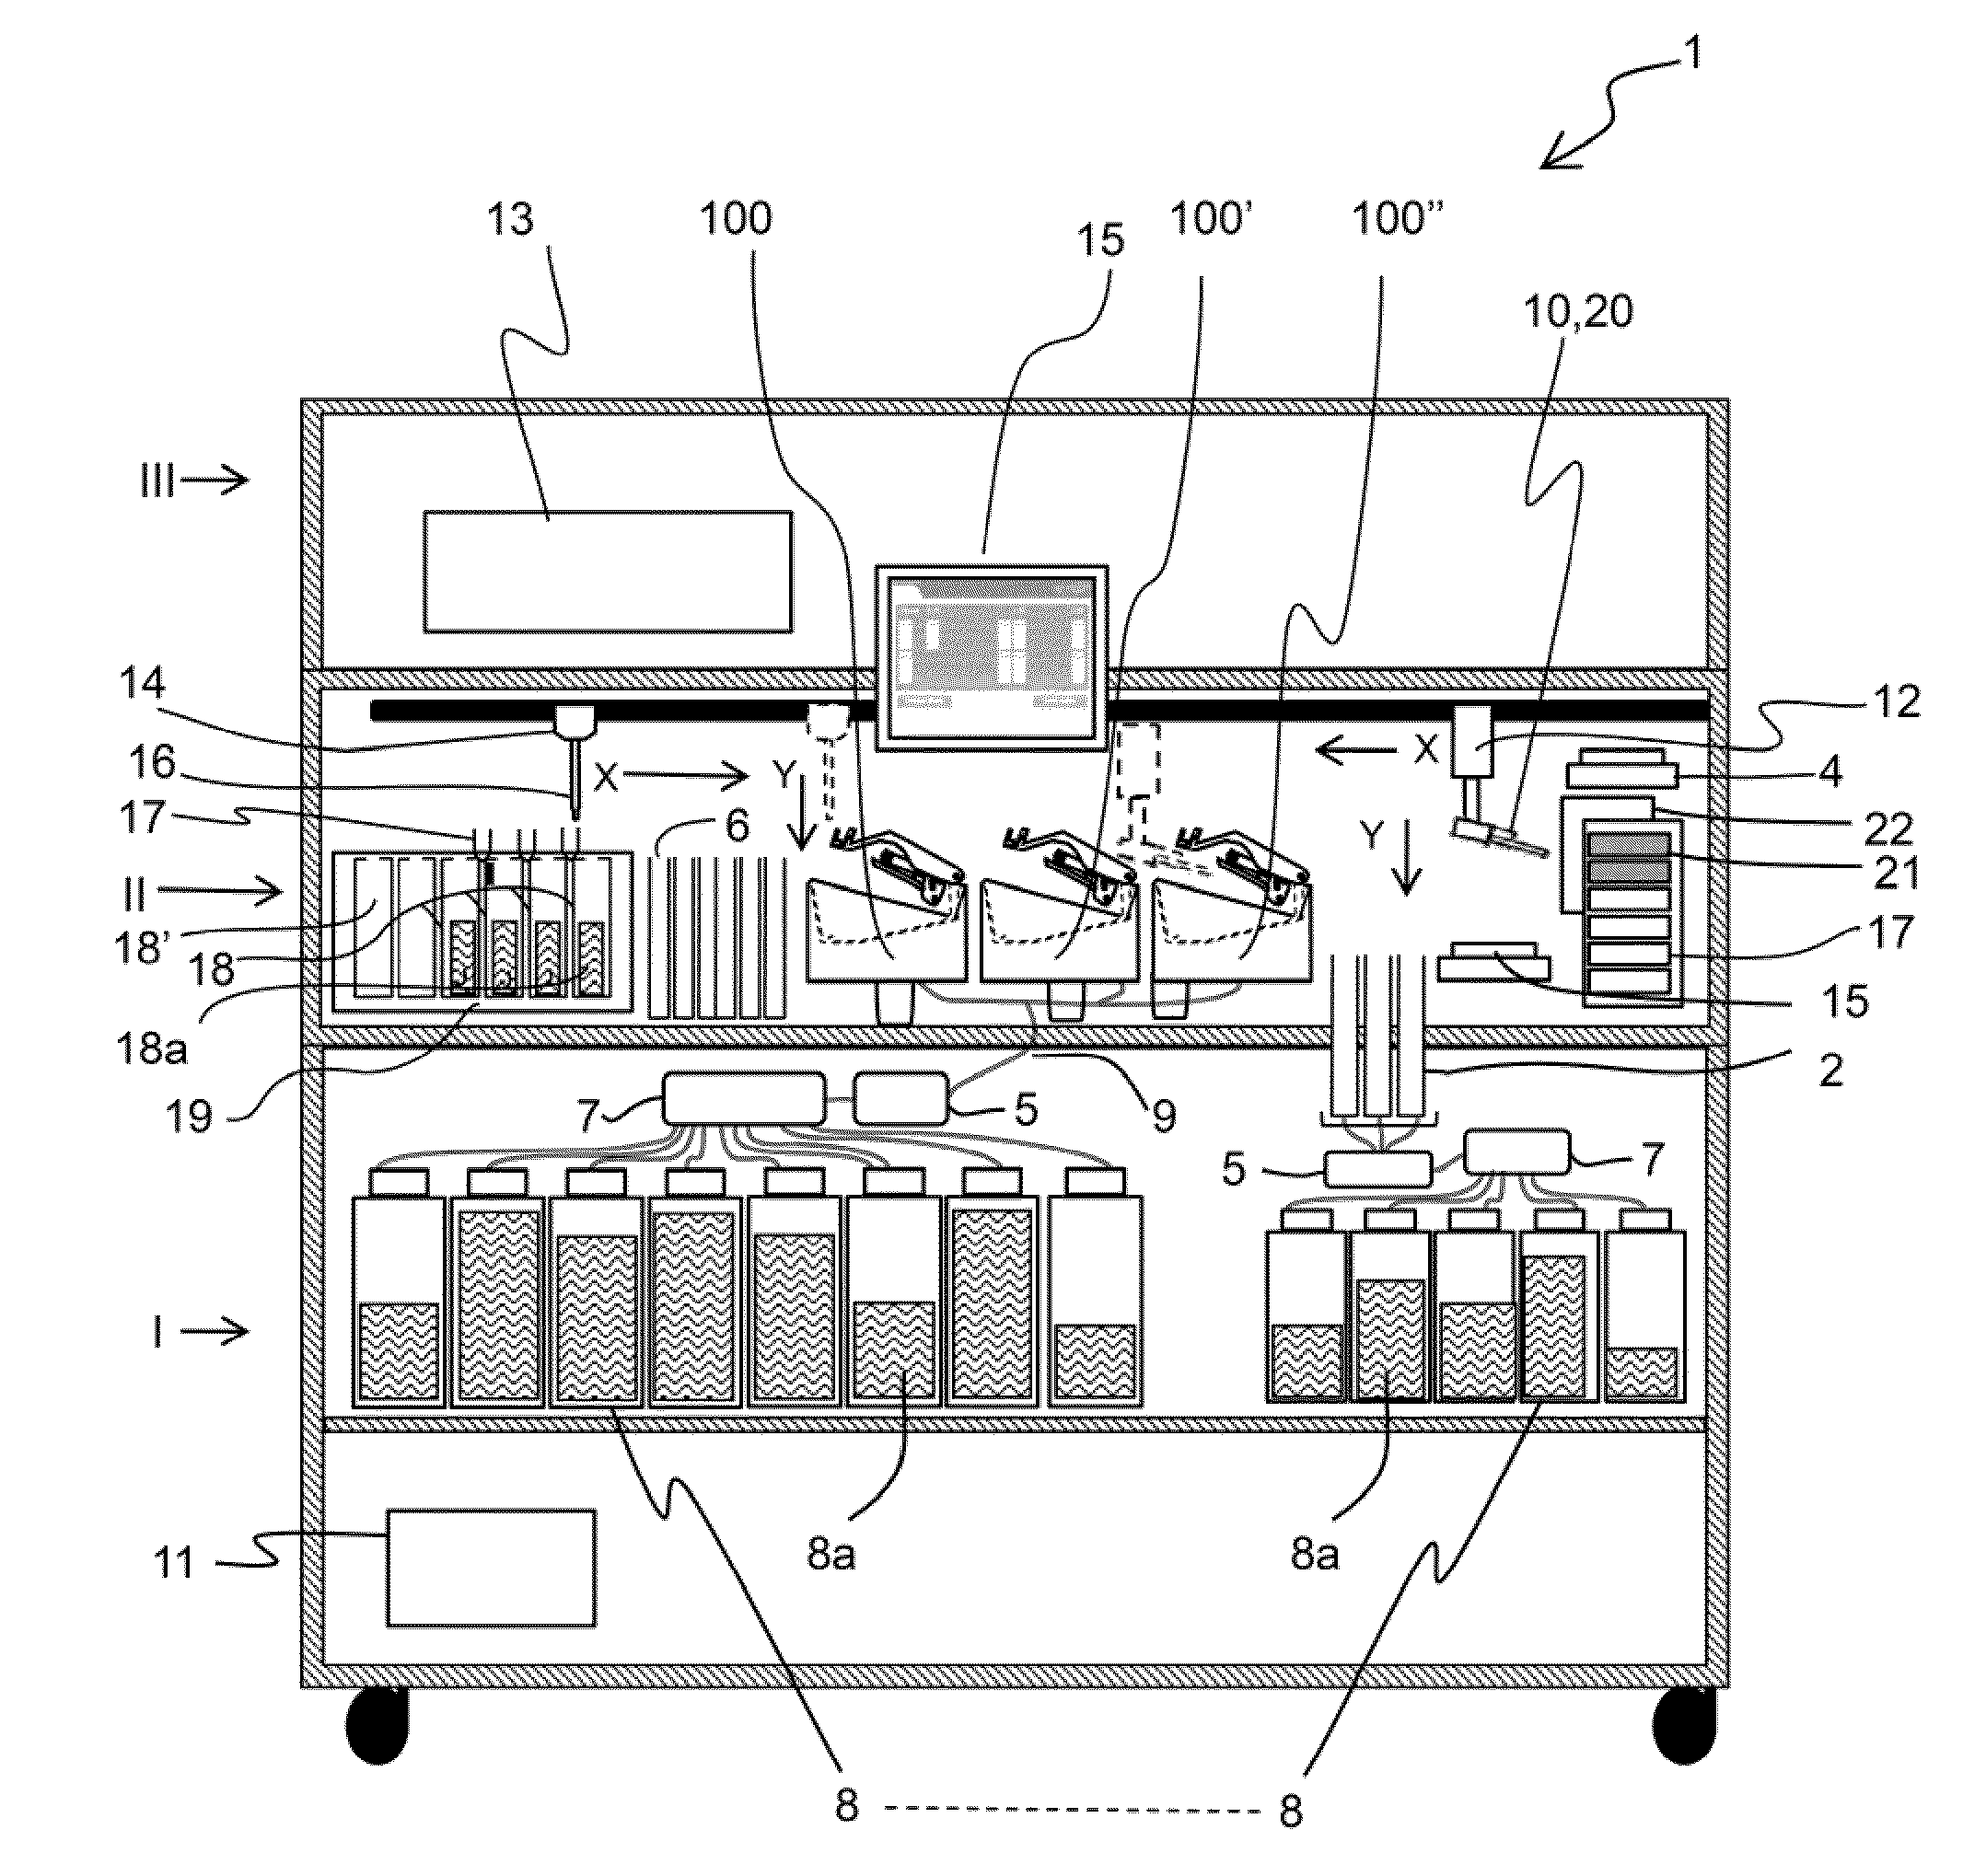 Apparatus and method for processing biological samples